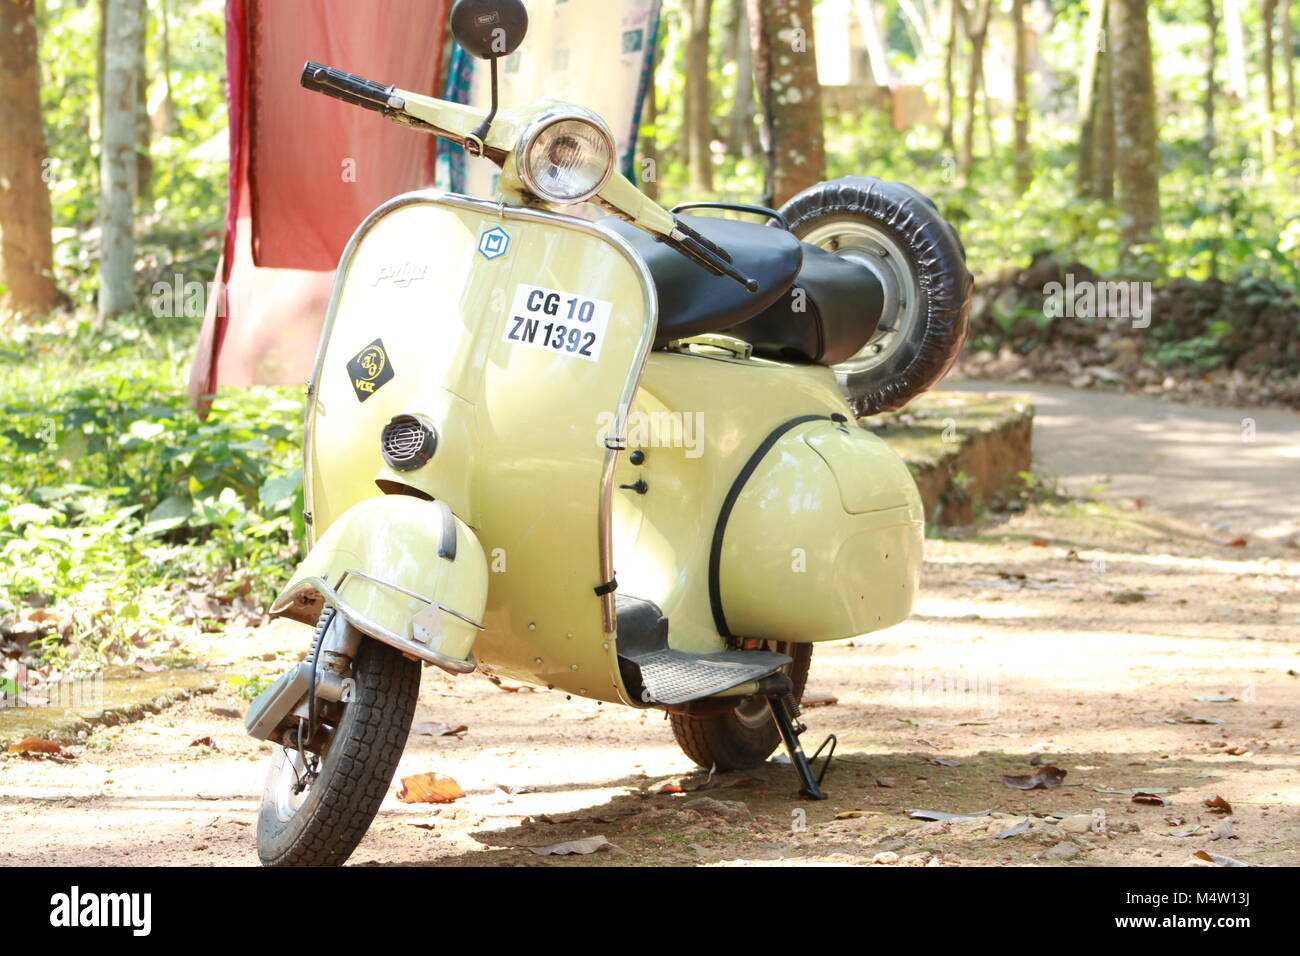 Bajaj Scooter High Resolution Stock Photography And Images Alamy